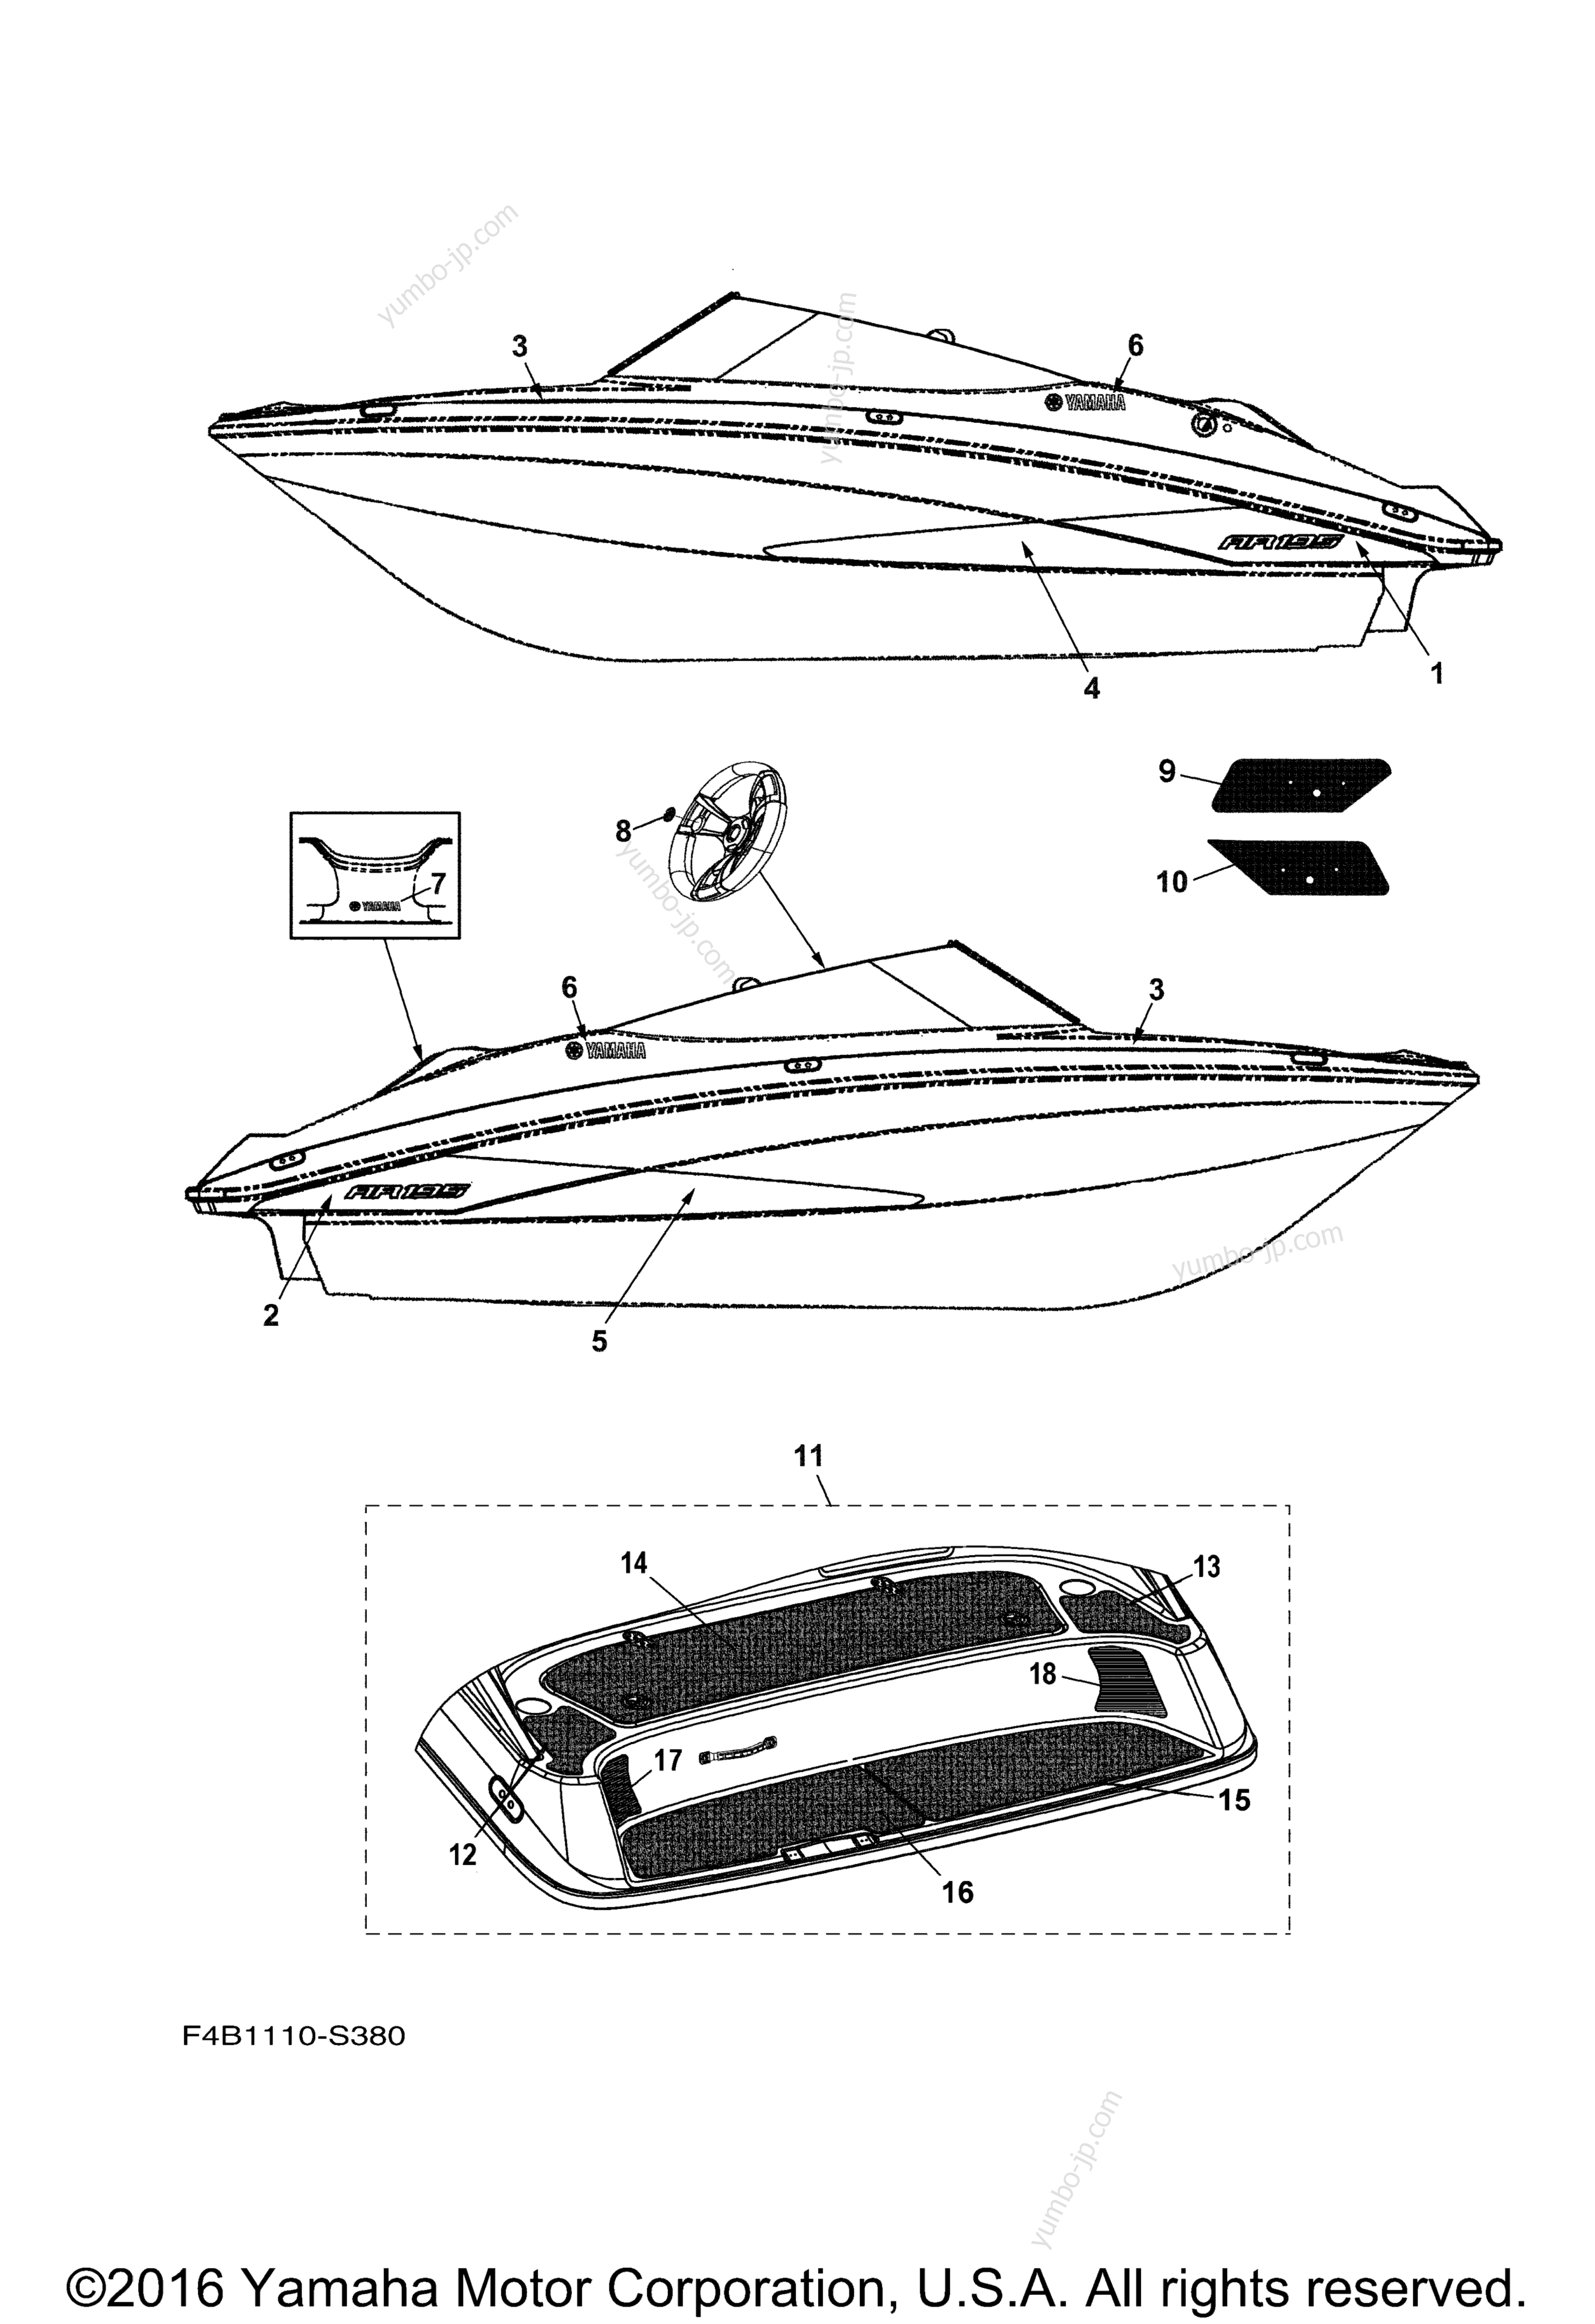 Graphics & Mats for boats YAMAHA AR195 (RP1800AS) 2017 year